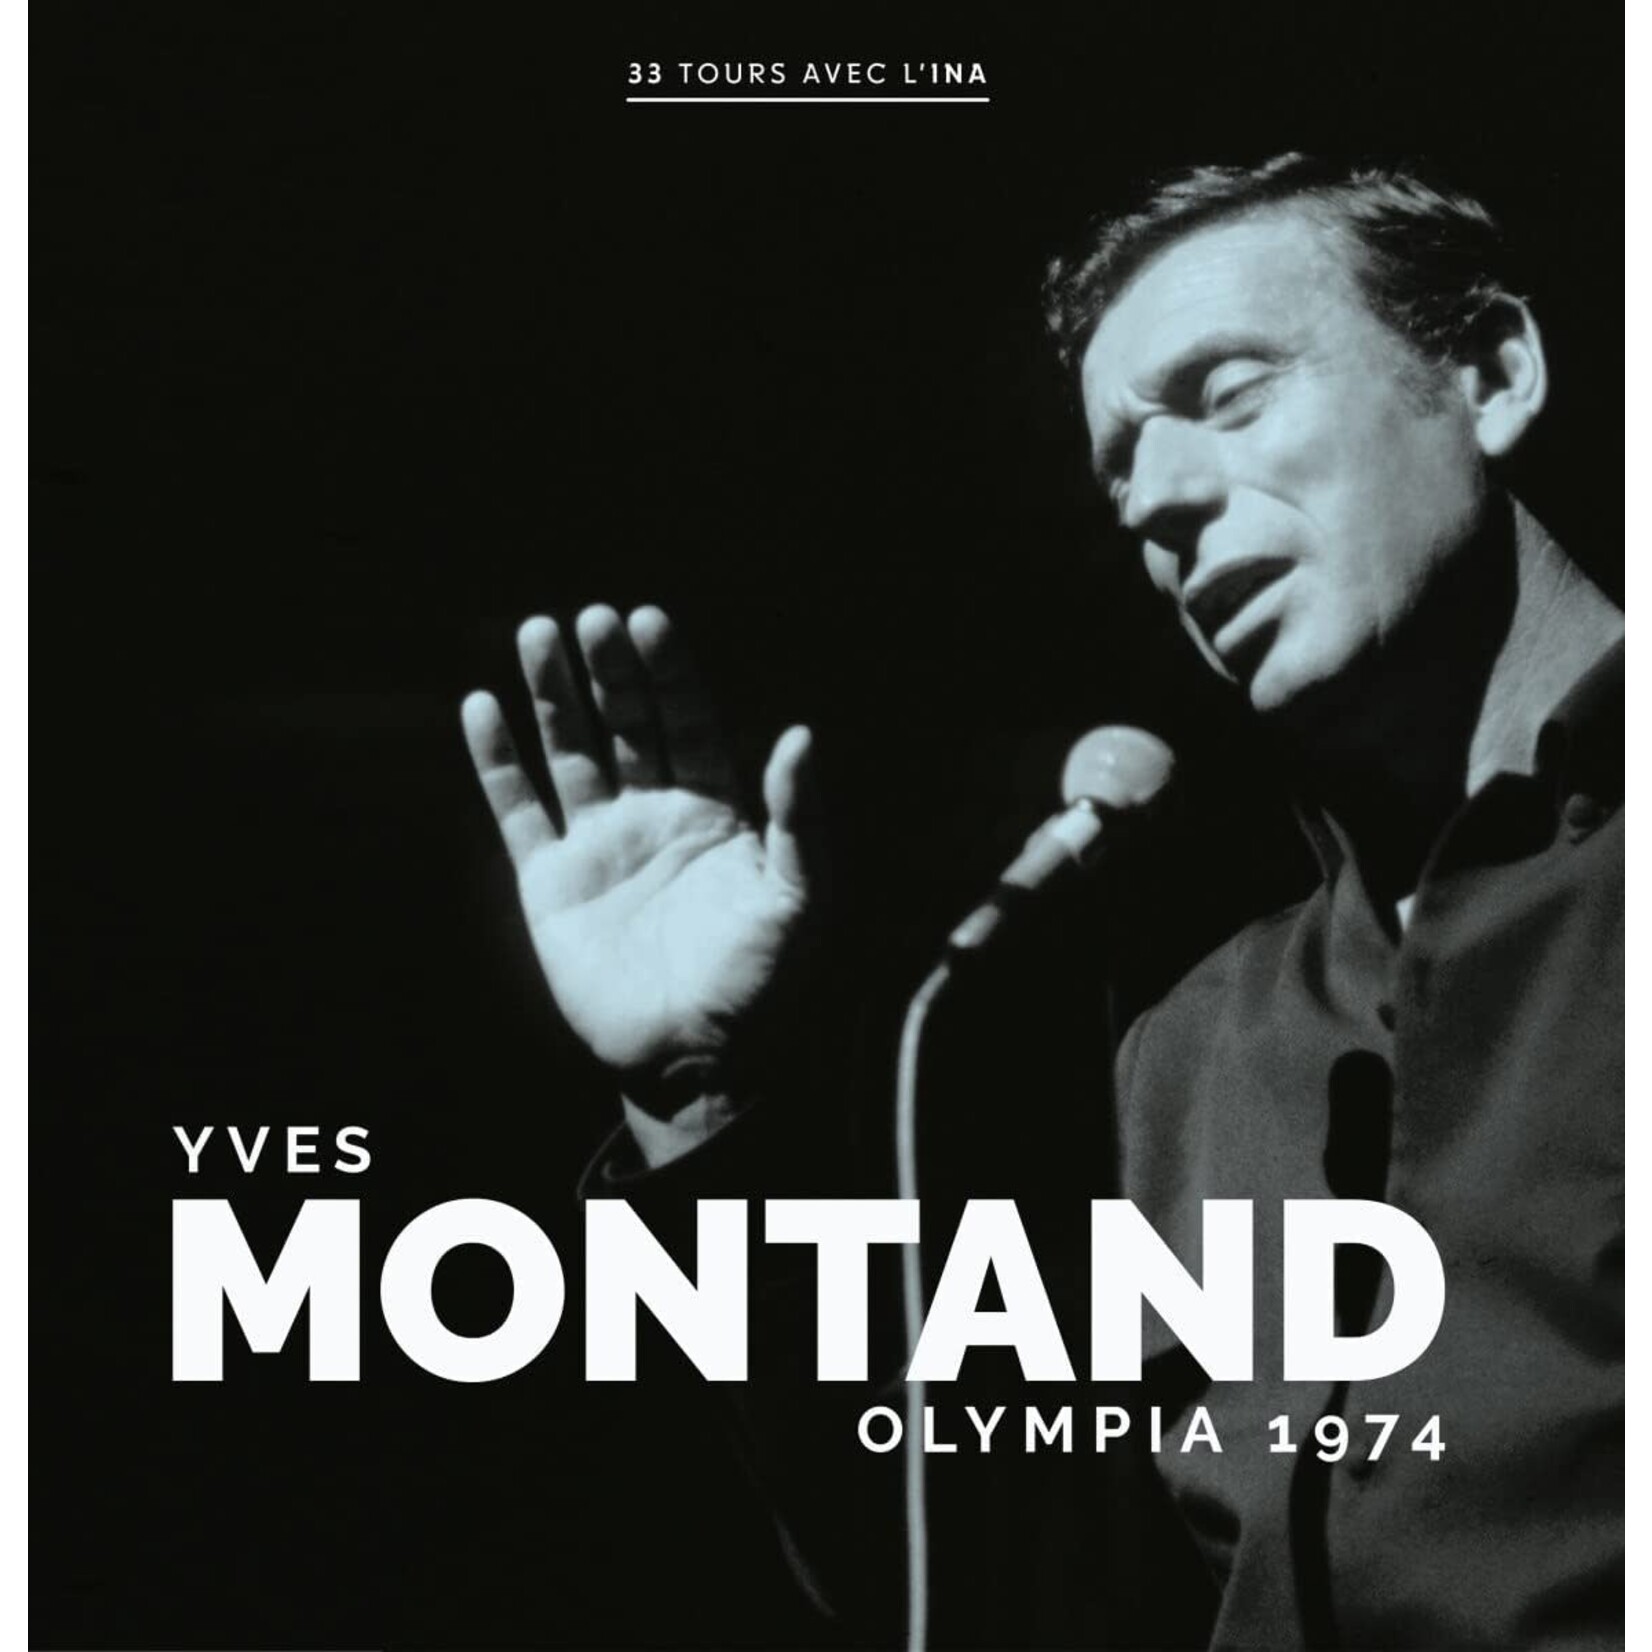 Yves Montand - Olympia 1974 [2LP] (RSD2022)